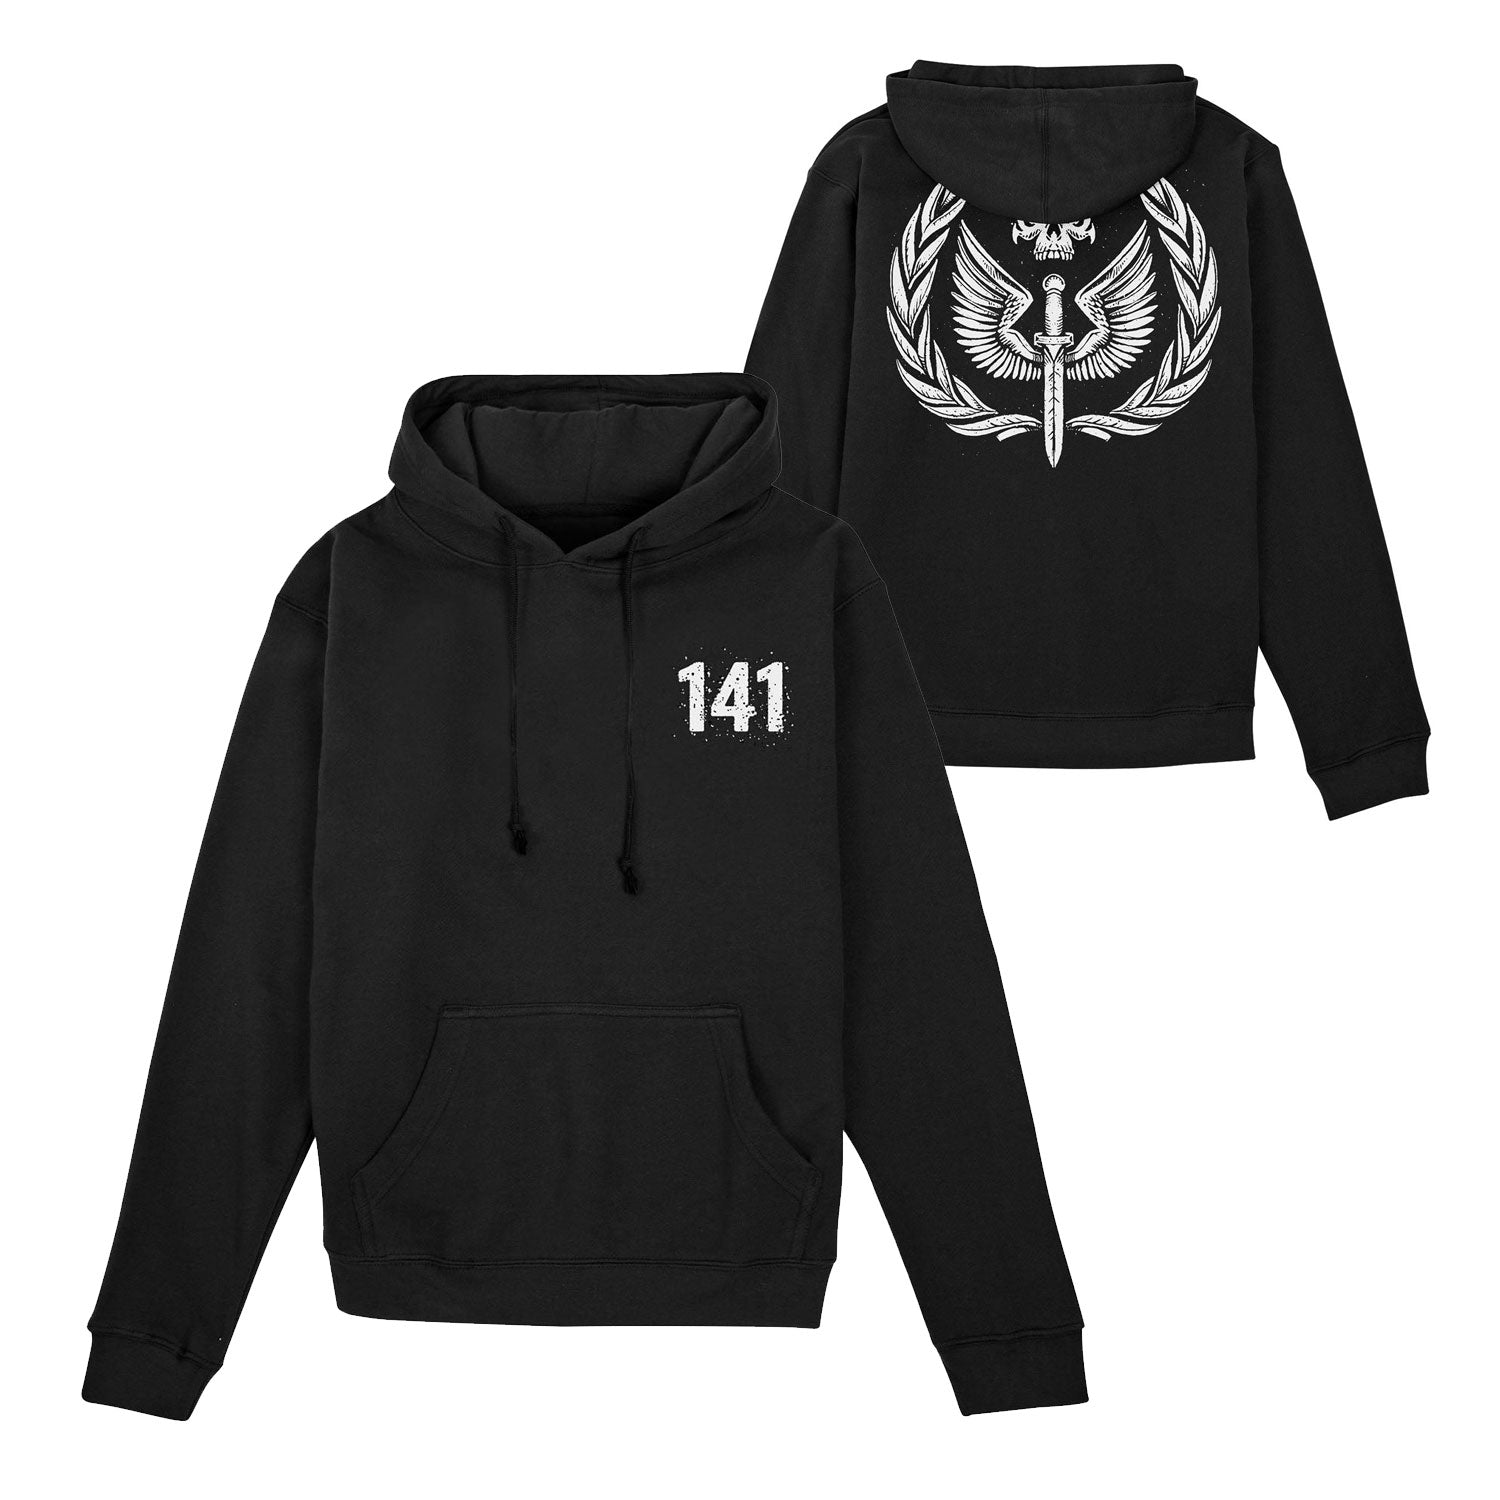 Call of Duty Task Force 141 Distressed Black Hoodie - Front and back views